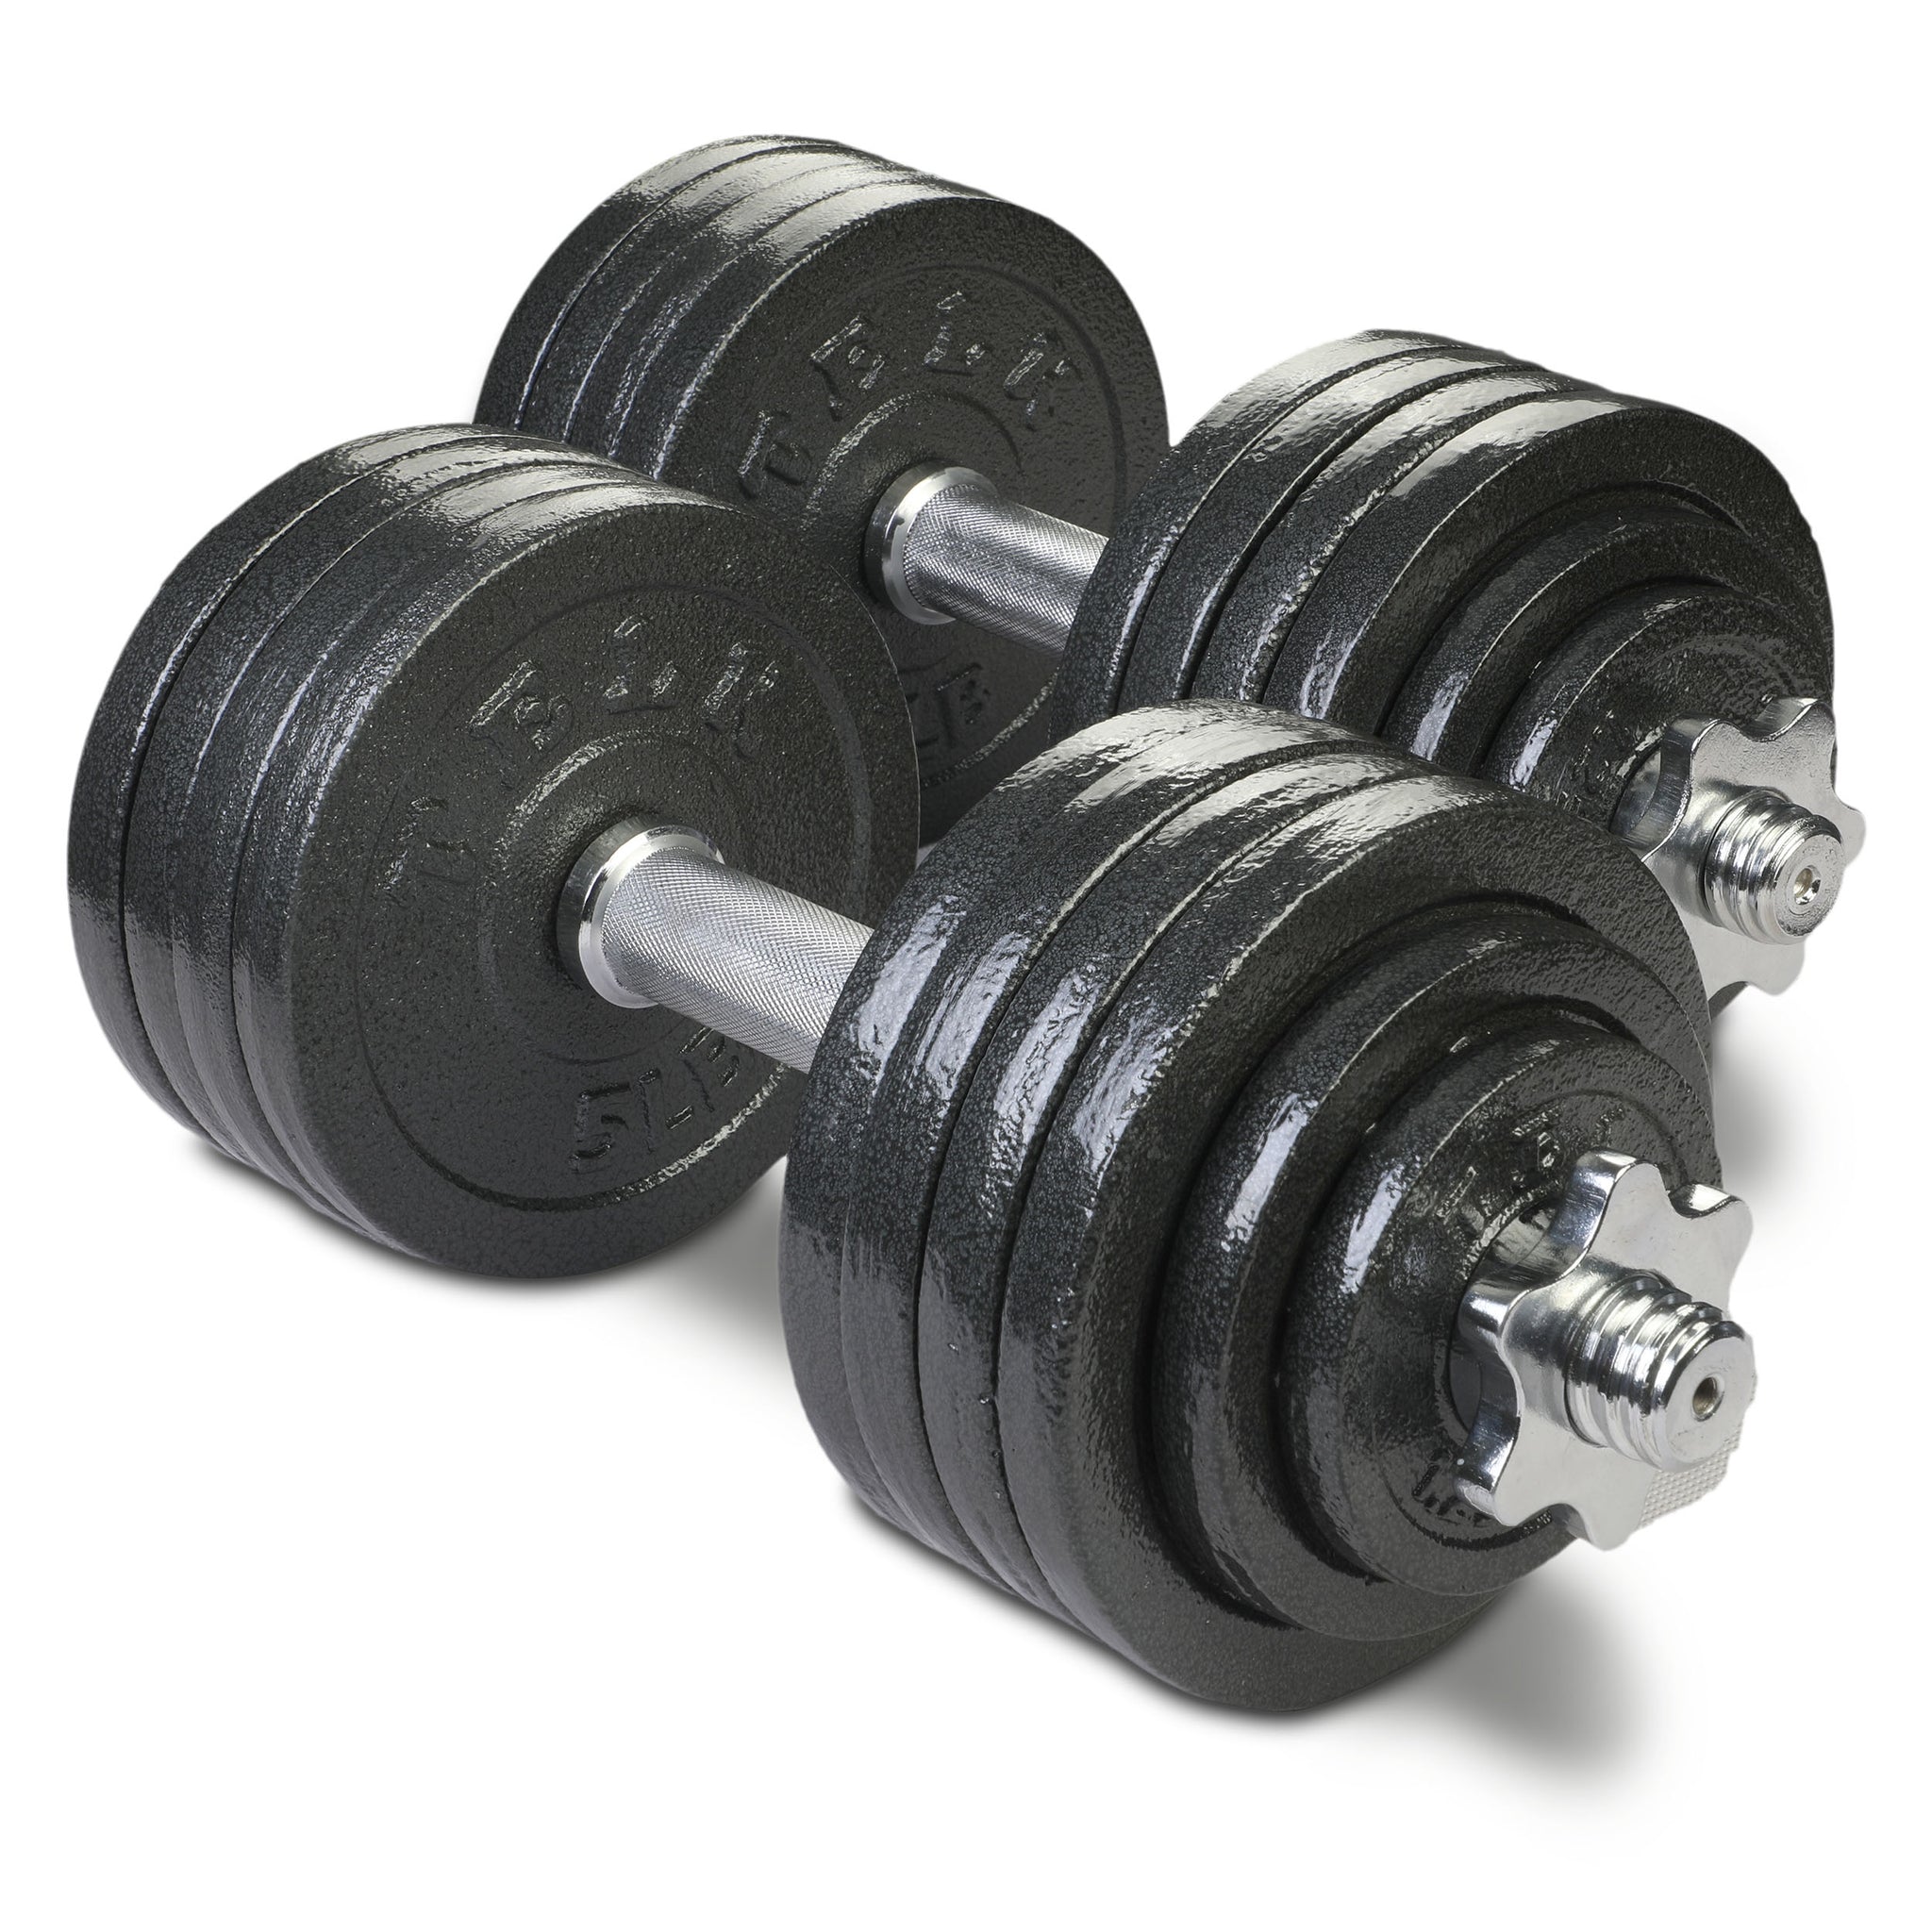 Adjustable Dumbbells 105lbs - Telk 2 dumbbell5 ibs exceptional quality